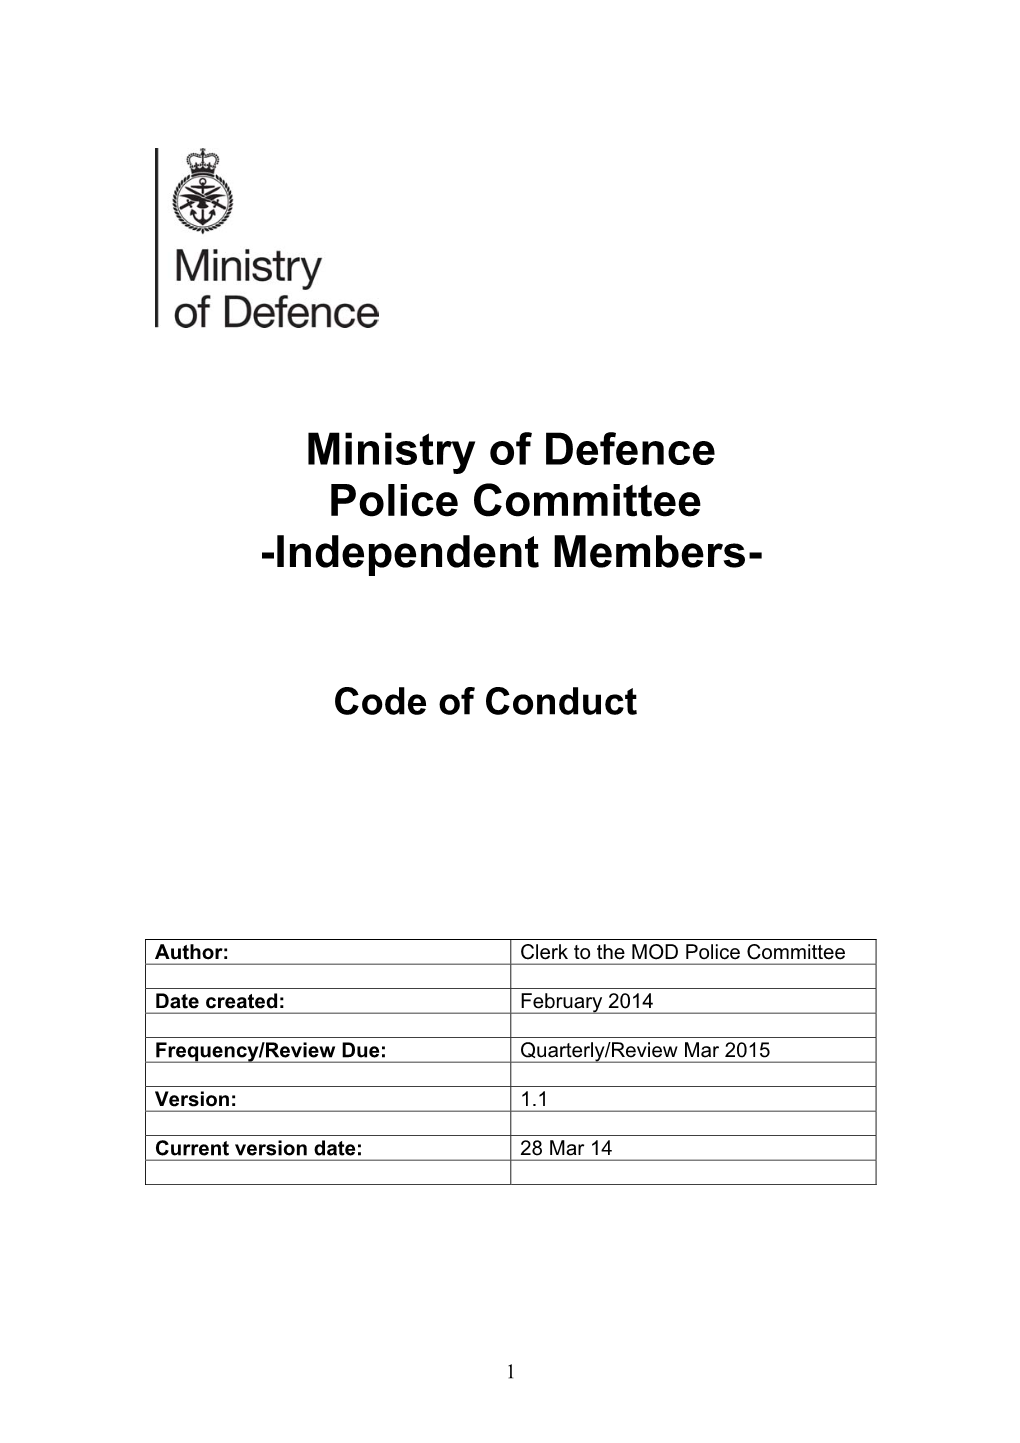 MOD Police Committee Independant Members